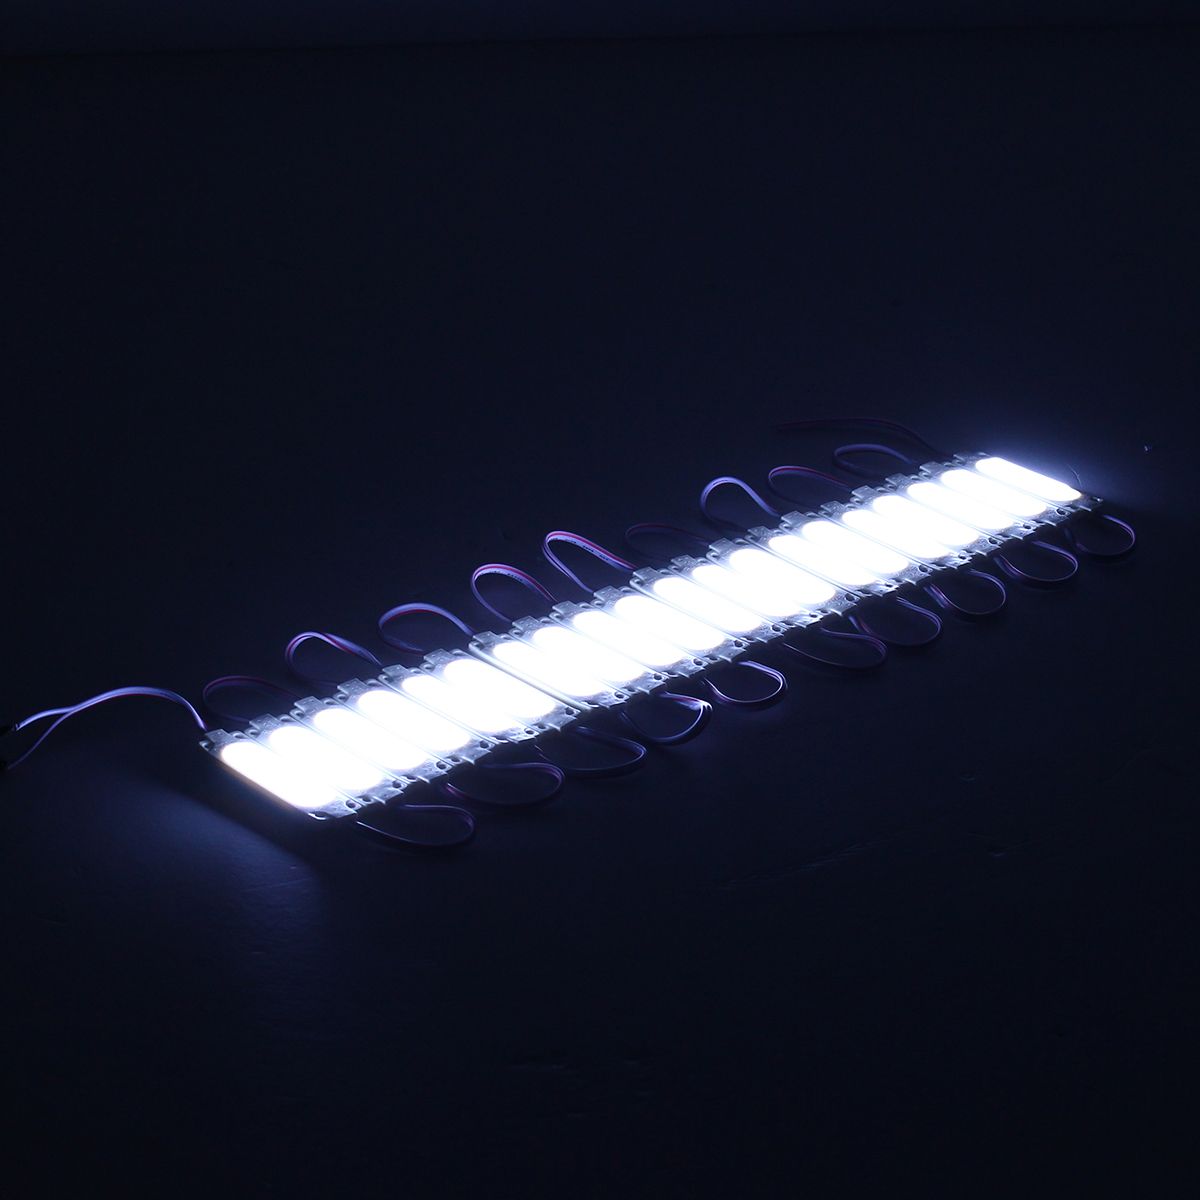 20PCS-16W-SMD5730-Pure-White-Warm-White-LED-Module-Strip-Light-for-Mirror-Advertisement-Sign-DC12V-1292876